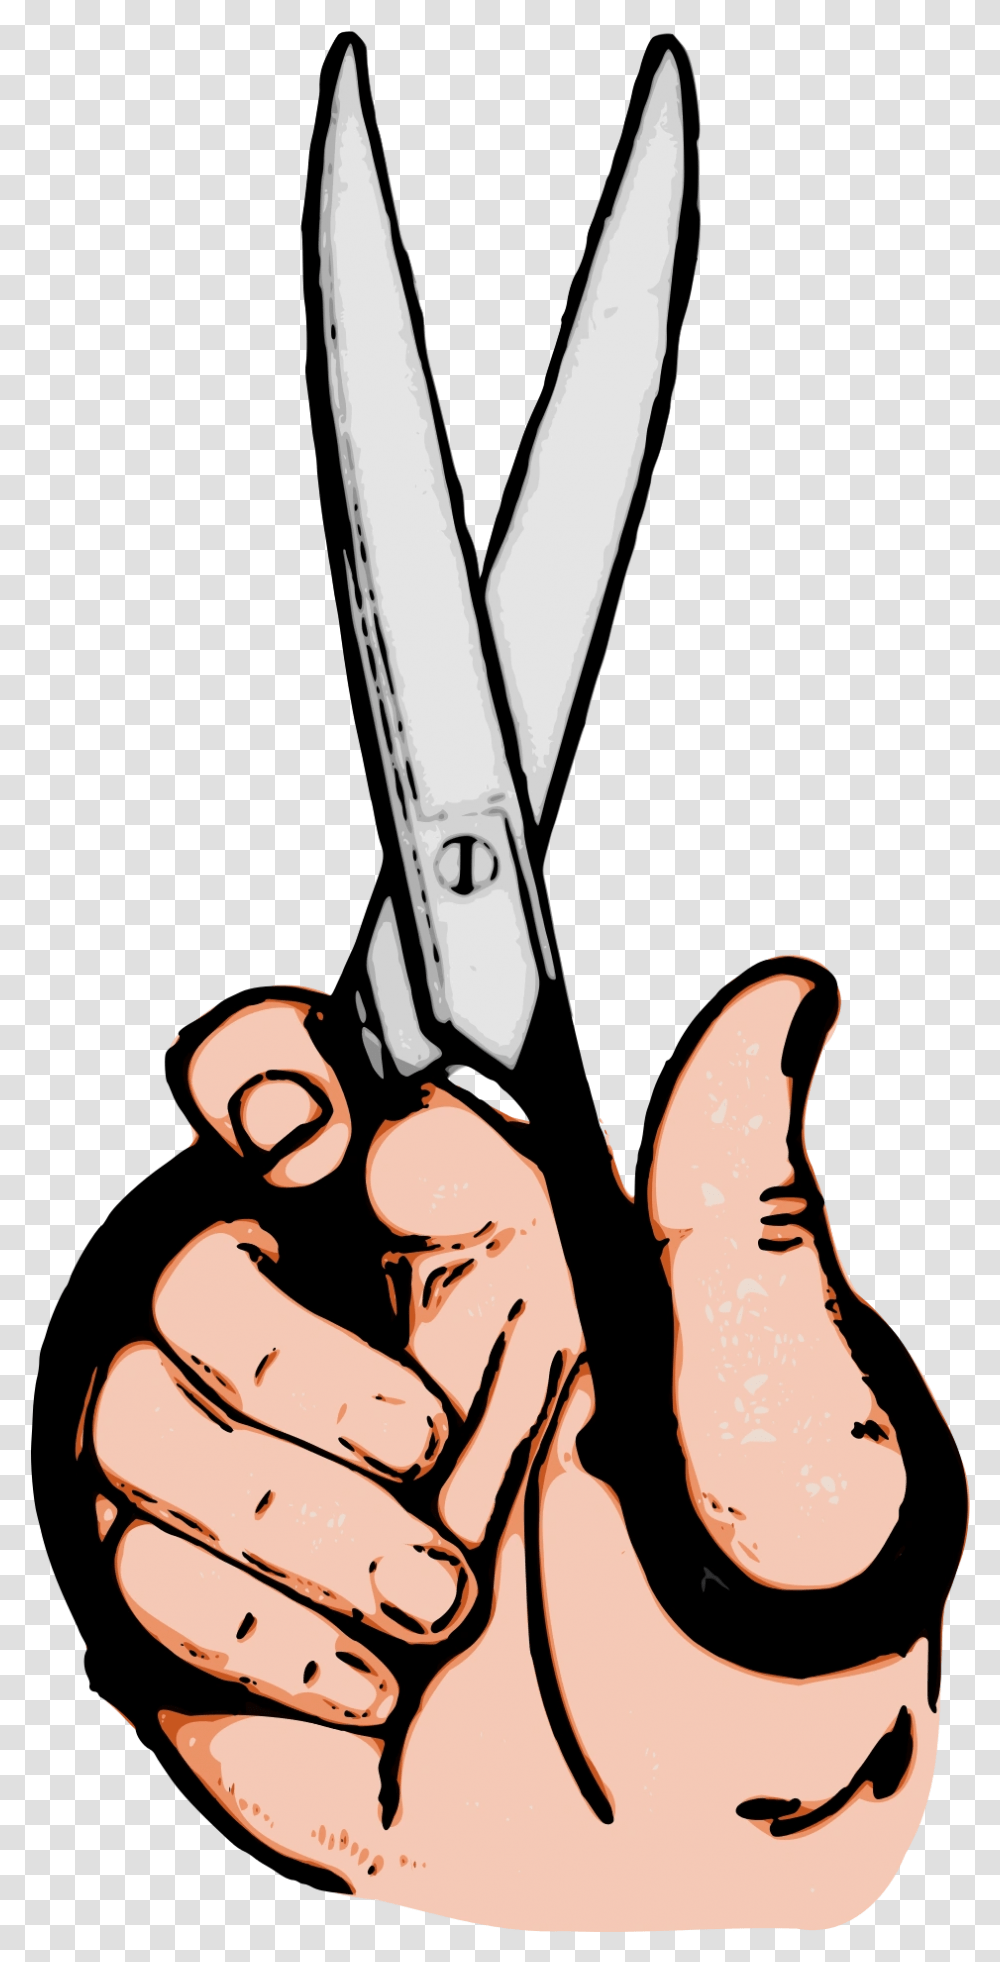 Scissors In Hand Cartoon, Weapon, Weaponry, Blade, Shears Transparent Png